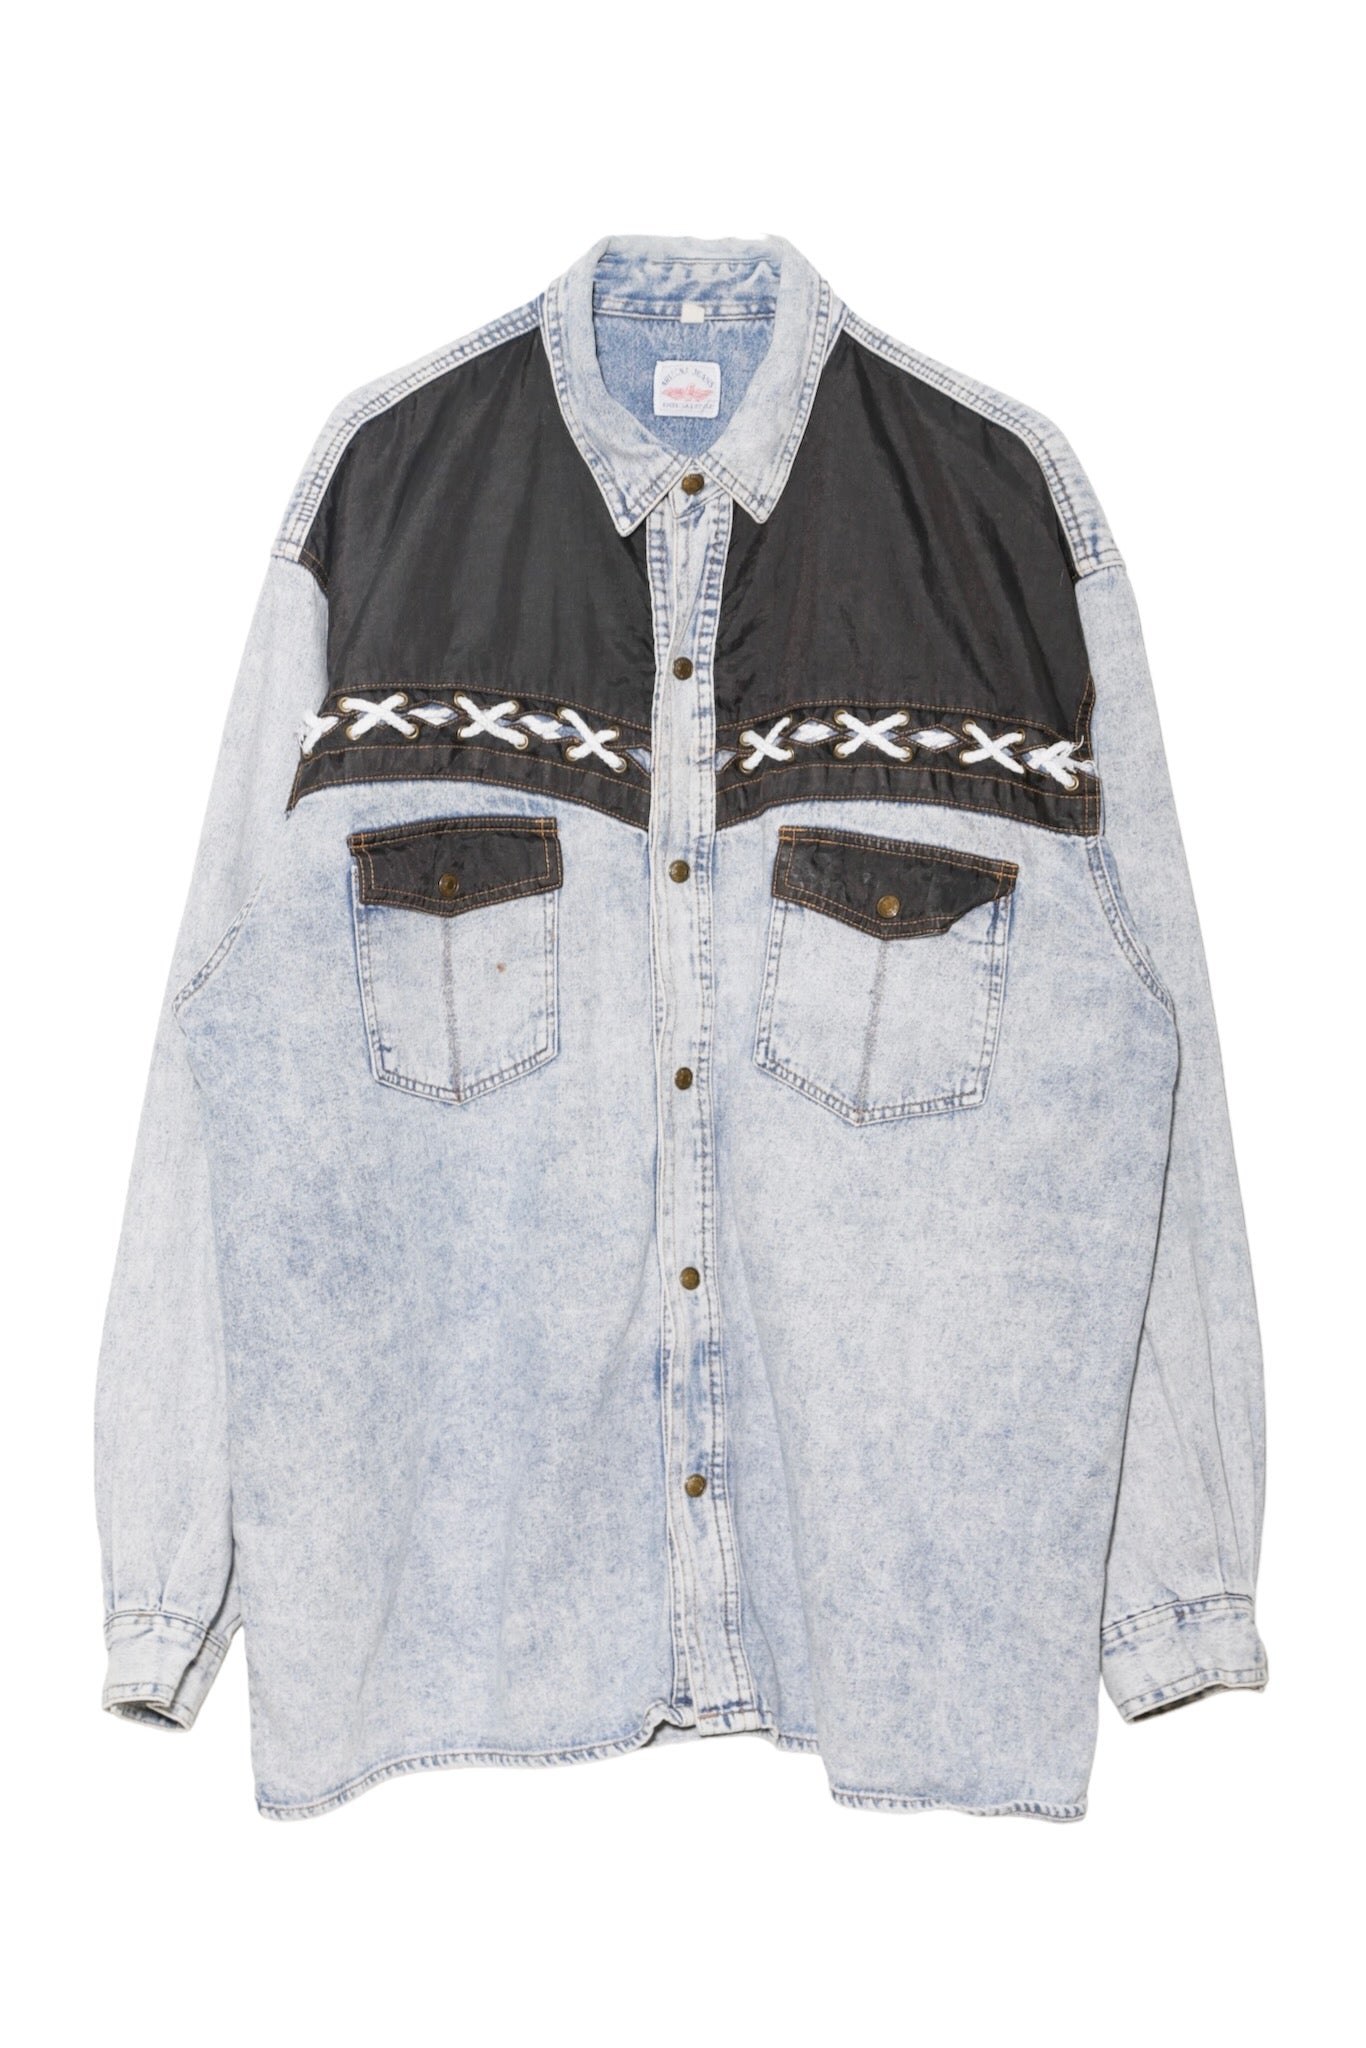 OVER SIZE WESTERN SHIRT